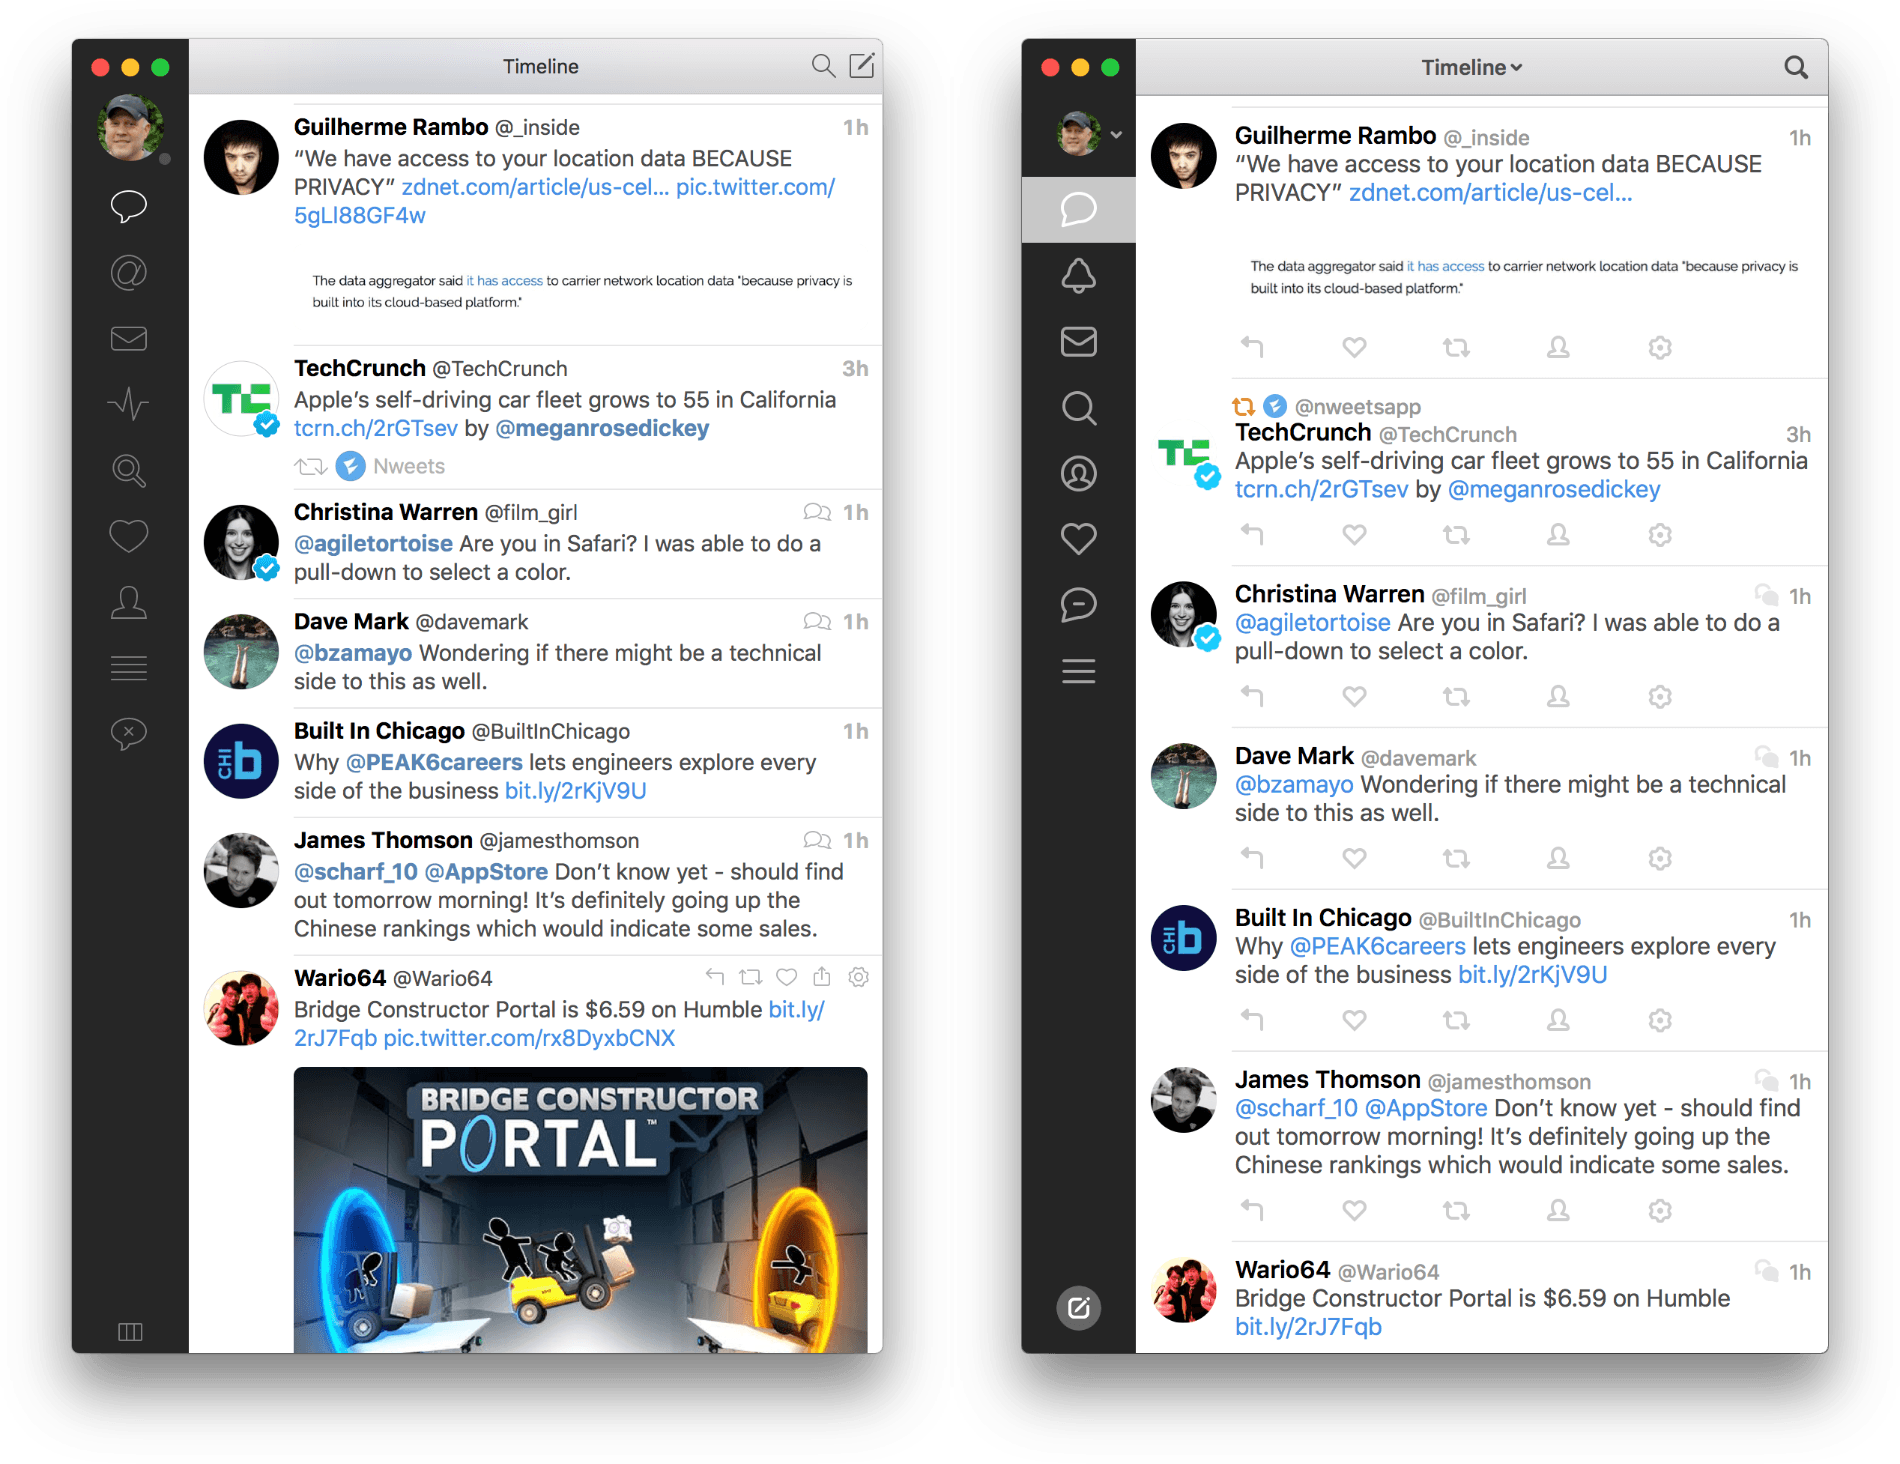 Tweetbot version 2.5 (left) and version 3.0 (right)